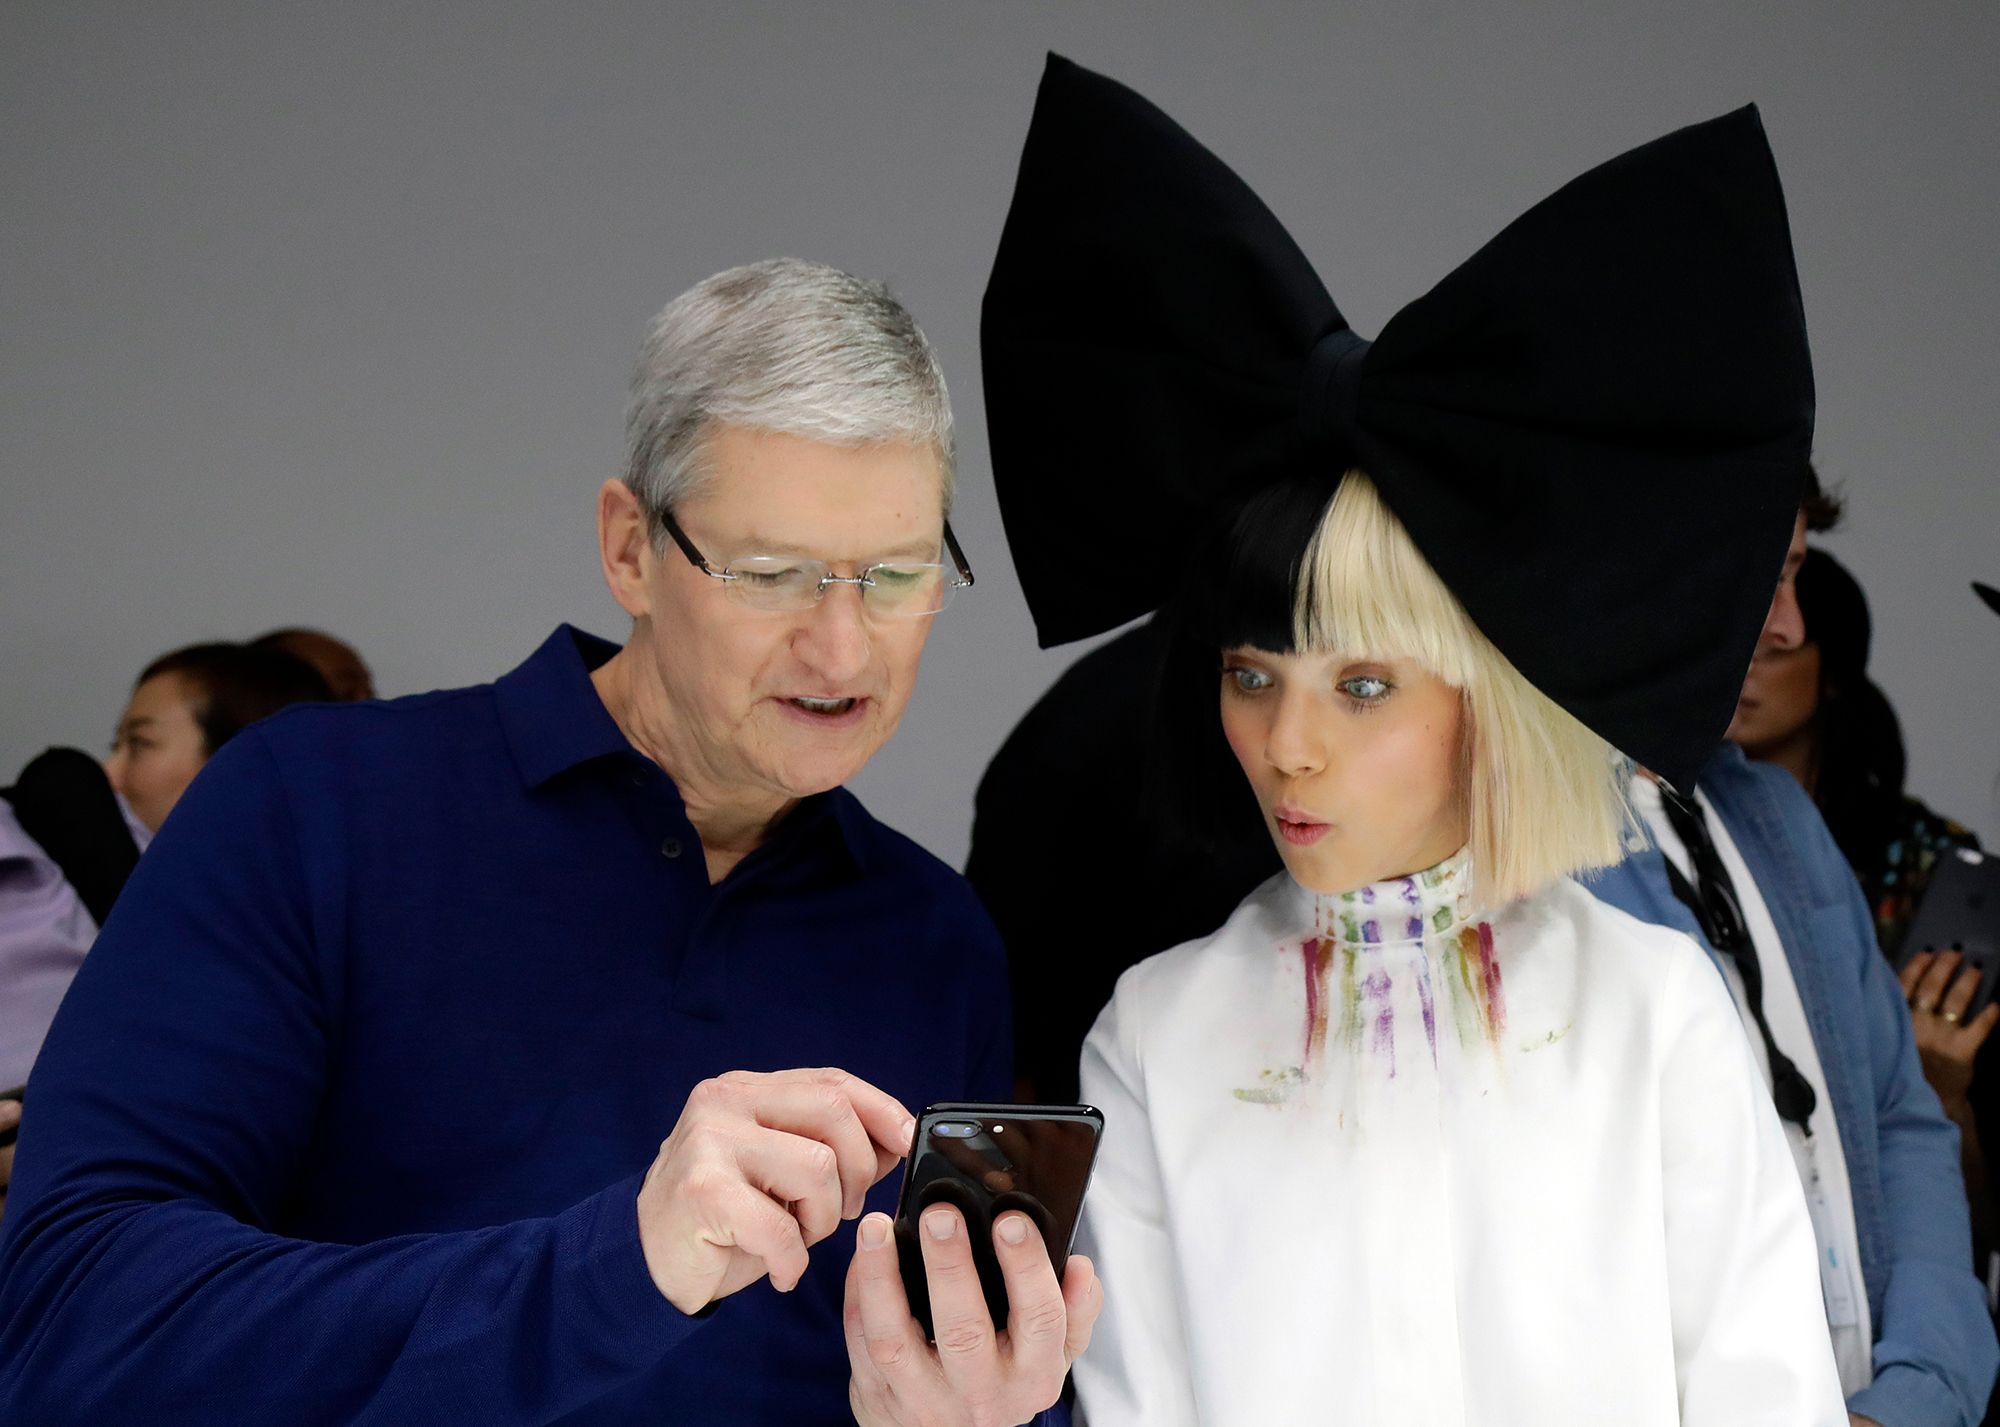 Is Tim Cook Right? Are Apps the Future of TV?  NCTA — The Internet &  Television Association